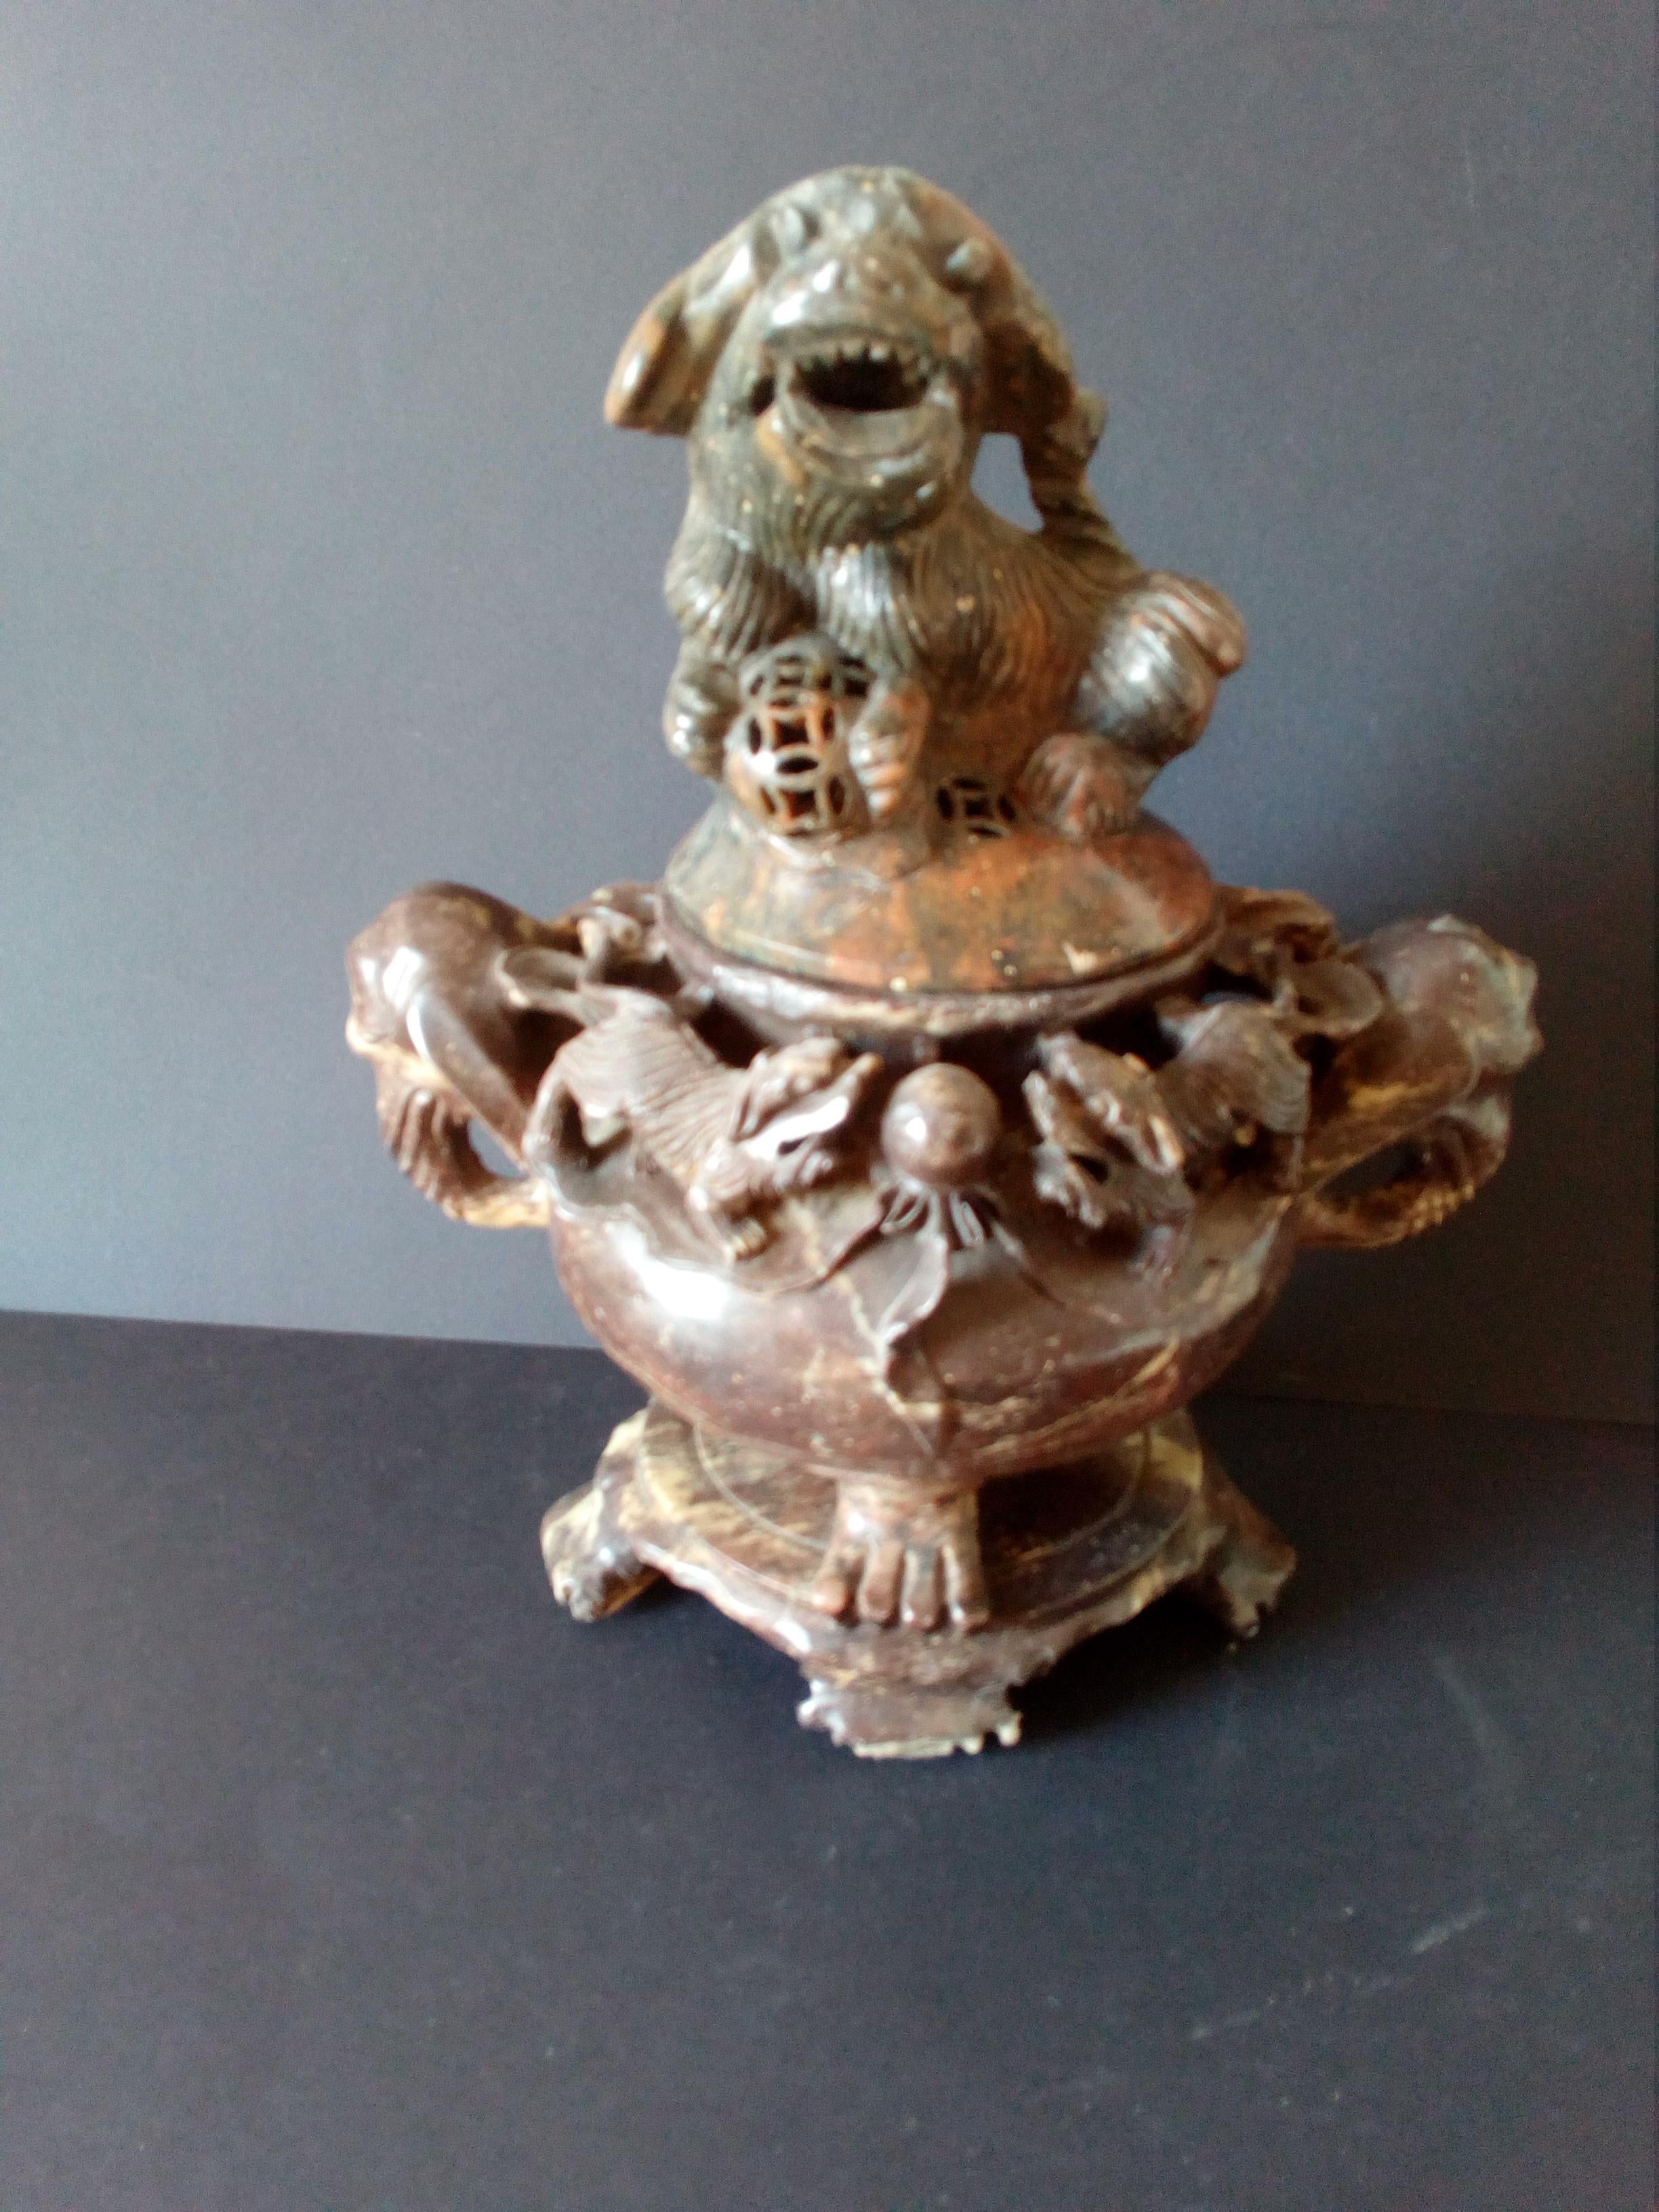 20th century Ming style Censer, Turkish onyx, surmounted by a Fo dog
Chinese object, Ming style.
Measures: Depth 11 cm
Width 18 cm
Height 24 cm.